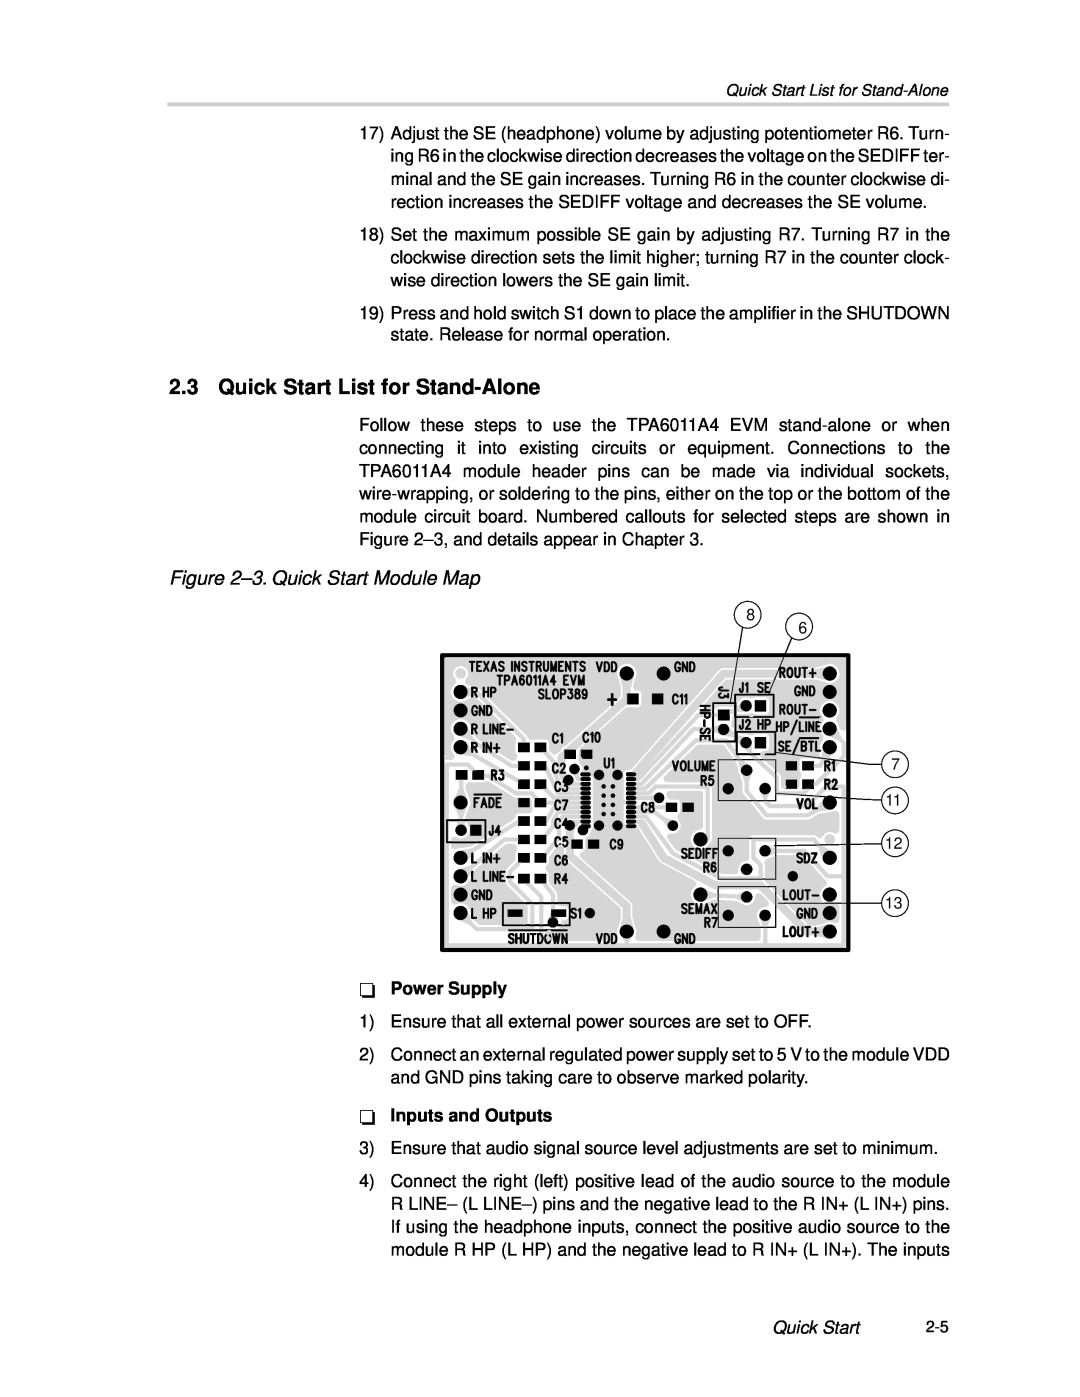 Texas Instruments SLOU121 manual 2.3Quick Start List for Stand-Alone, 3.Quick Start Module Map 